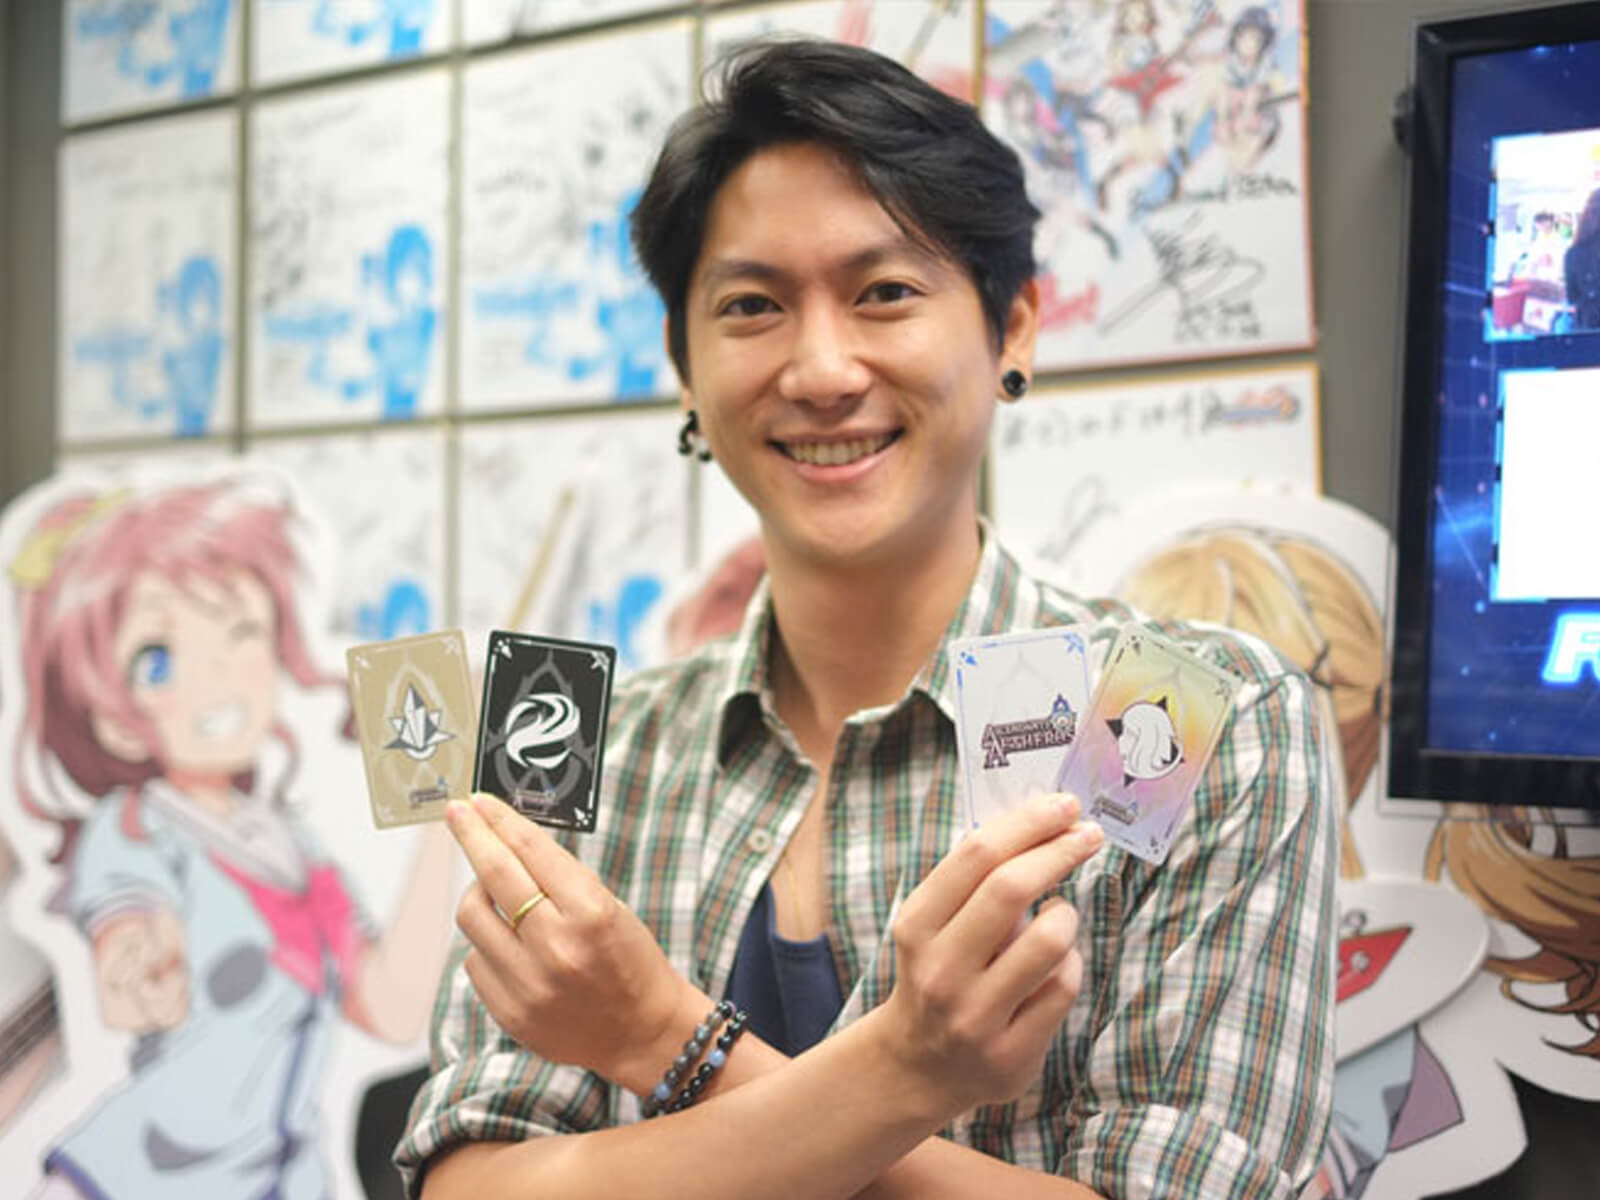 RTIS graduate Rudy Ng poses holding four cards from the card game Ascendants of Aetheros